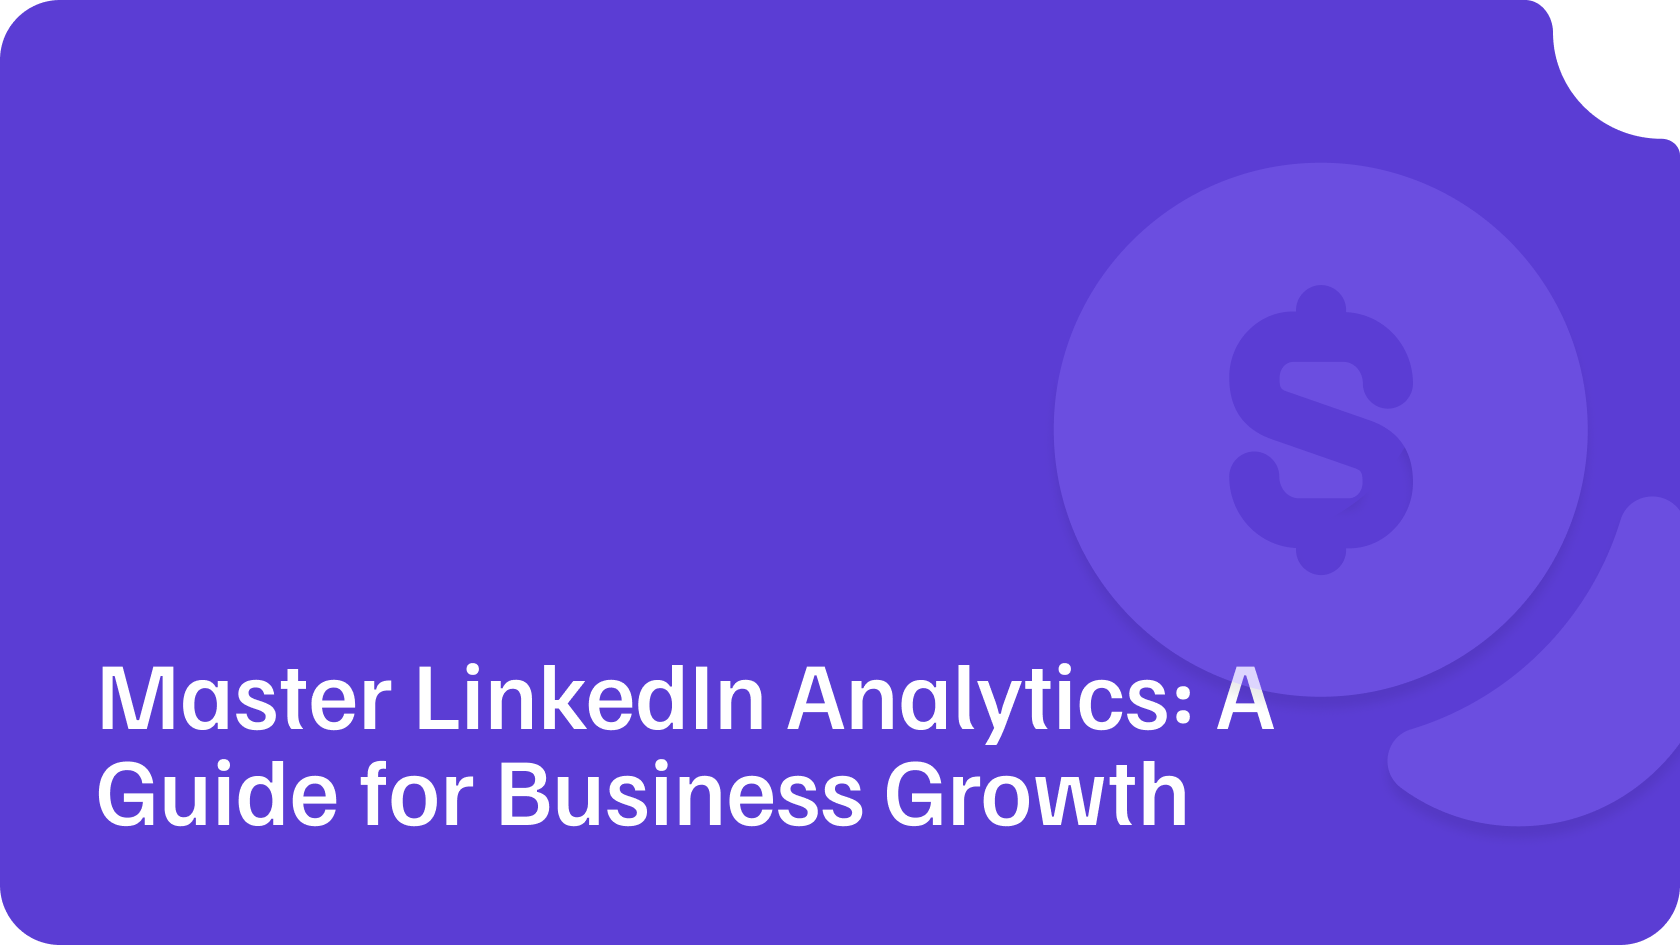 Master LinkedIn Analytics: A Guide for Business Growth